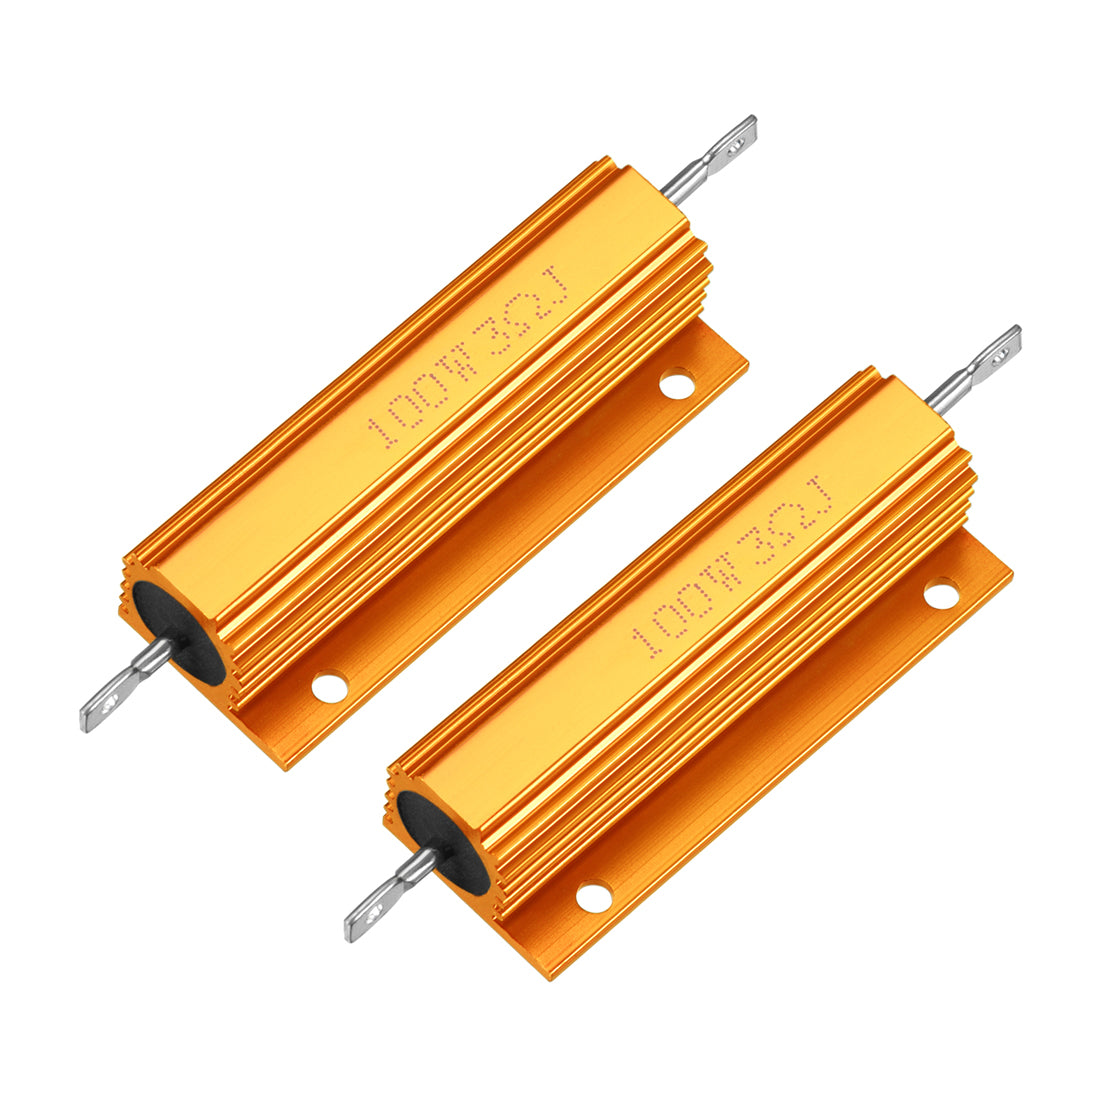 uxcell Uxcell Aluminum Case Resistor 100W 3 Ohm Wirewound Yellow for LED Replacement Converter 2Pcs